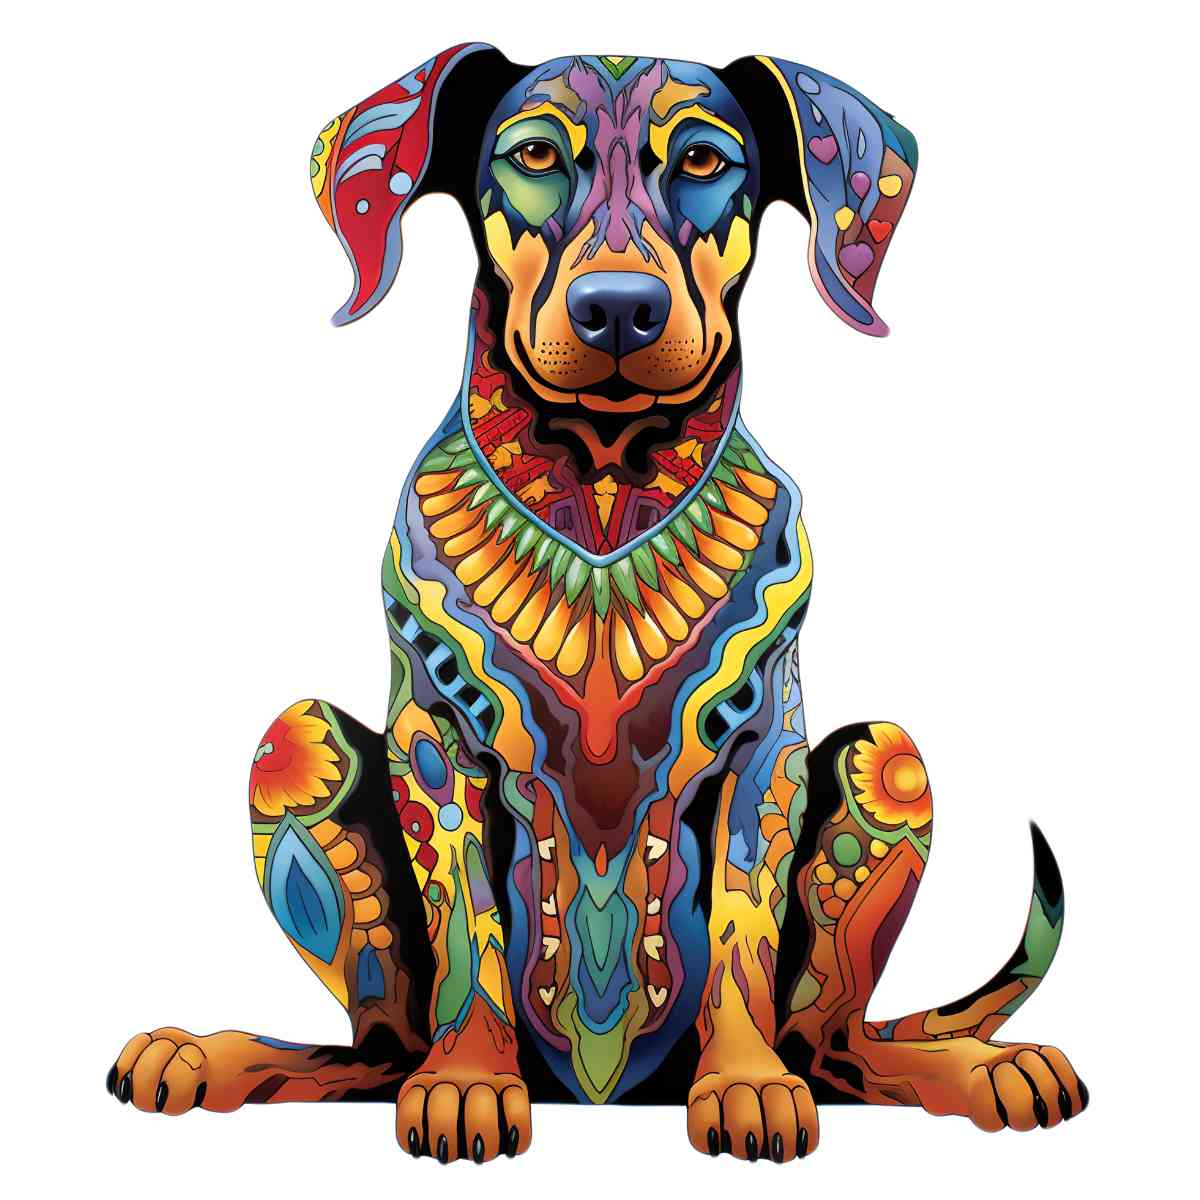 Animal Jigsaw Puzzle > Wooden Jigsaw Puzzle > Jigsaw Puzzle A3 Doberman Dog - Jigsaw Puzzle